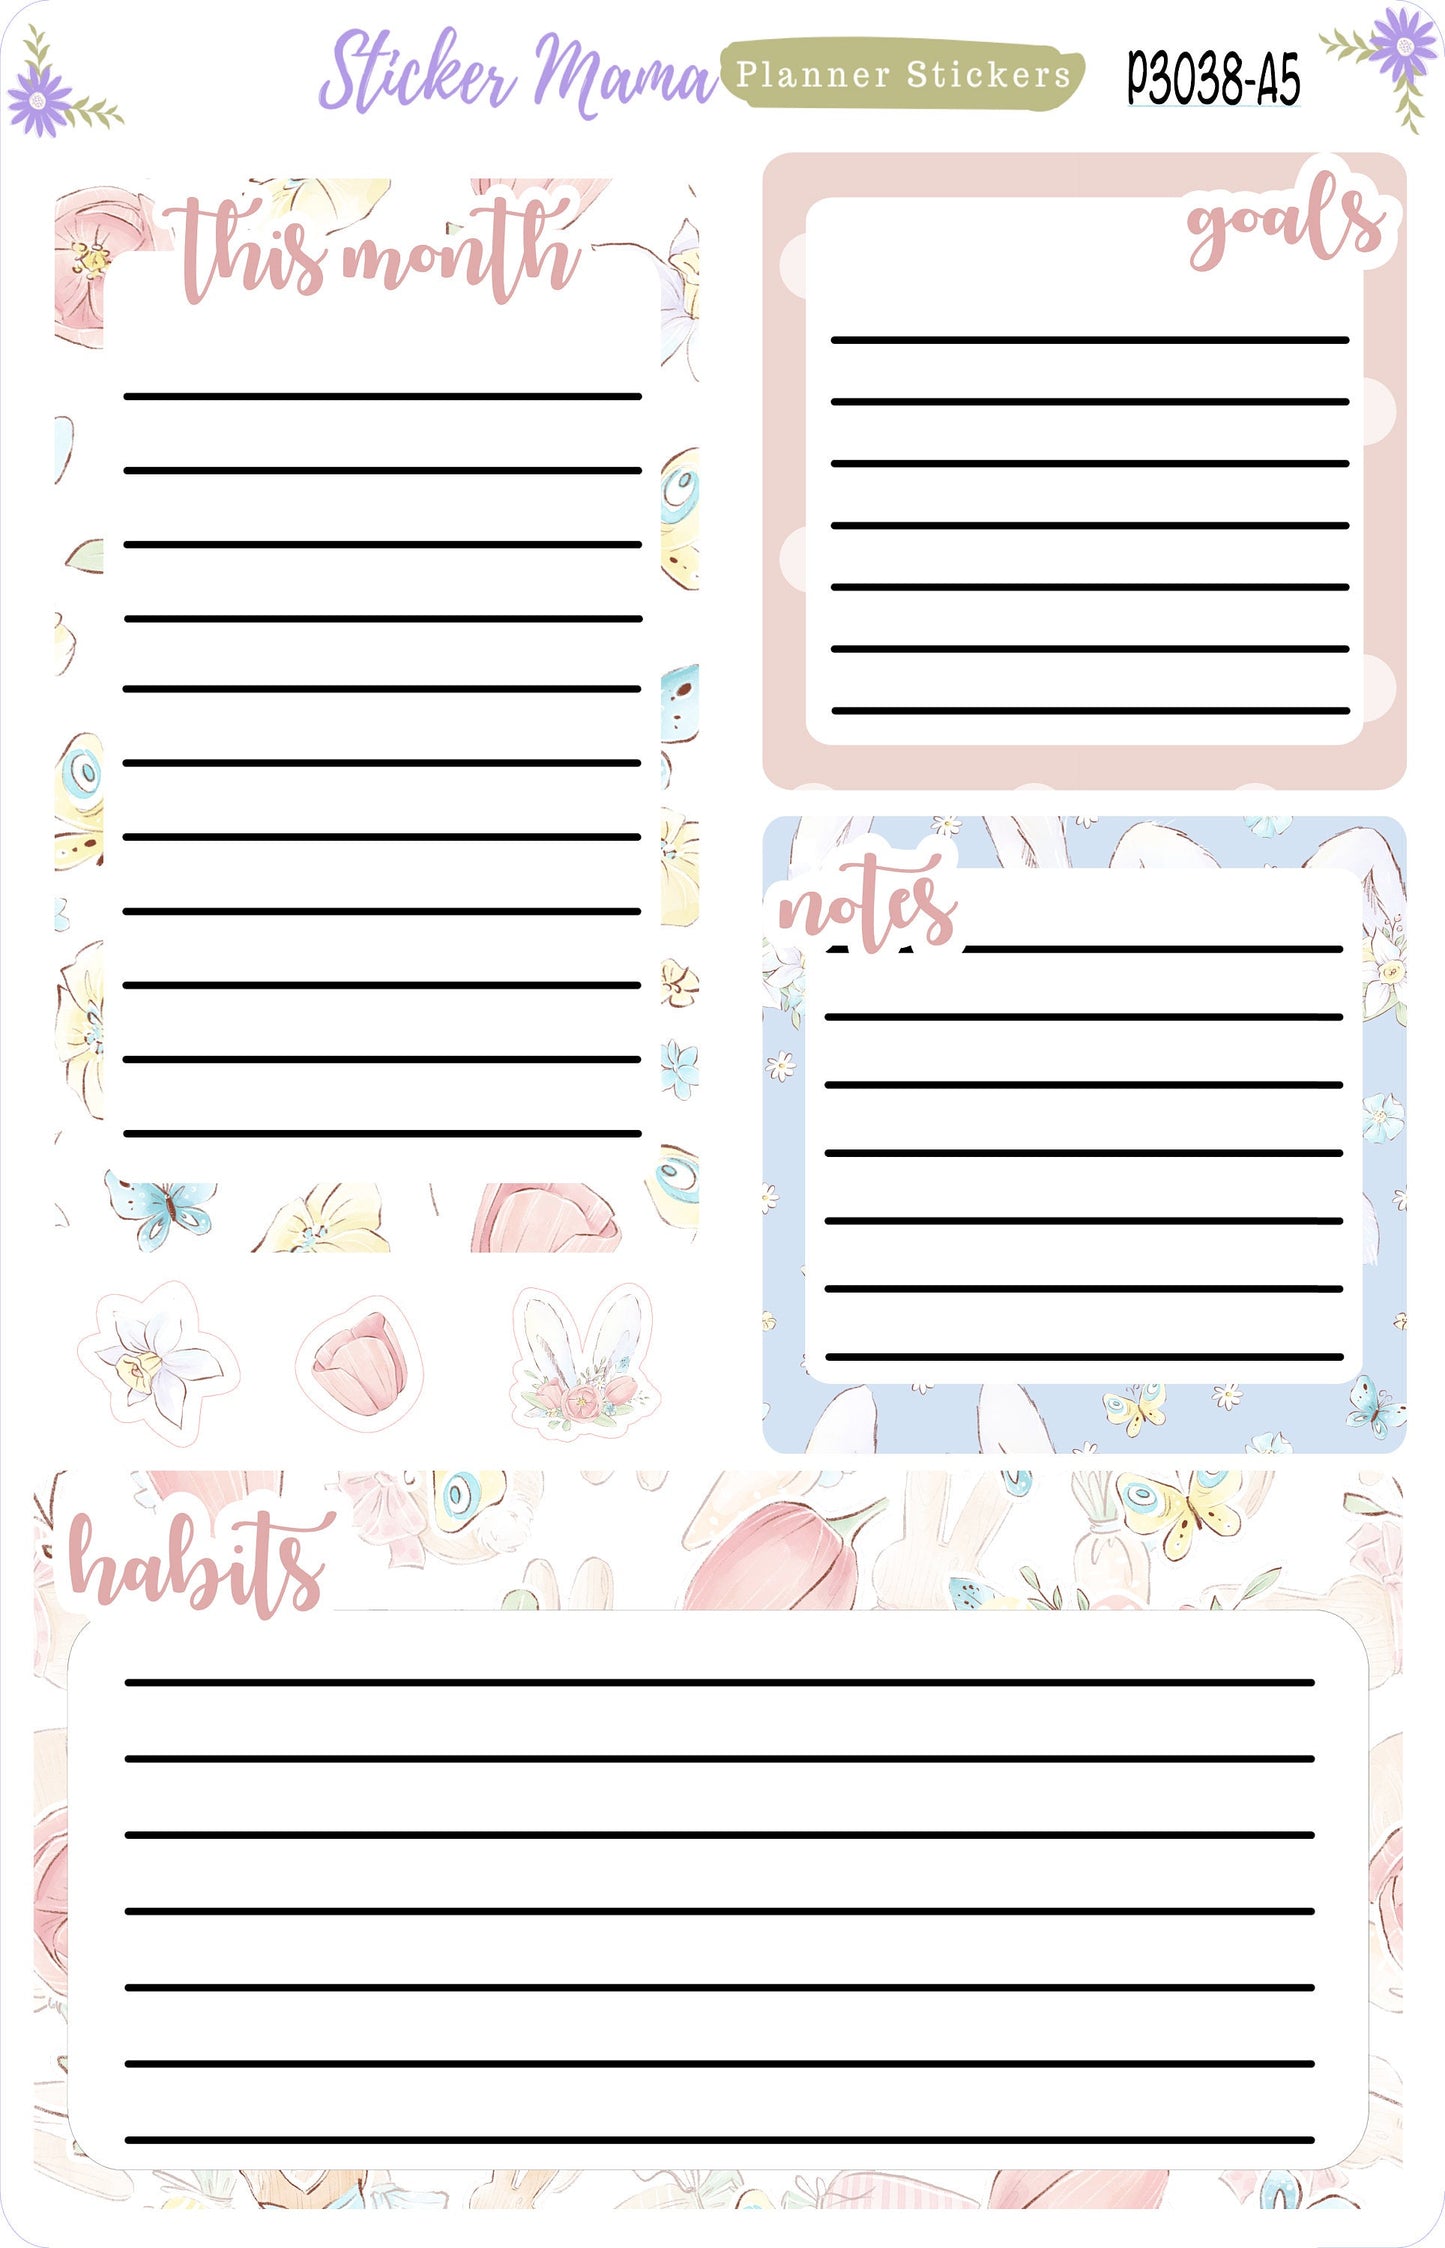 3038  "Easter Spring Time"  || A5 or 7x9 PRODUCTIVITY DASHBOARD Sticker || eclp notes page || productivity planner || Easter Planner Sticker